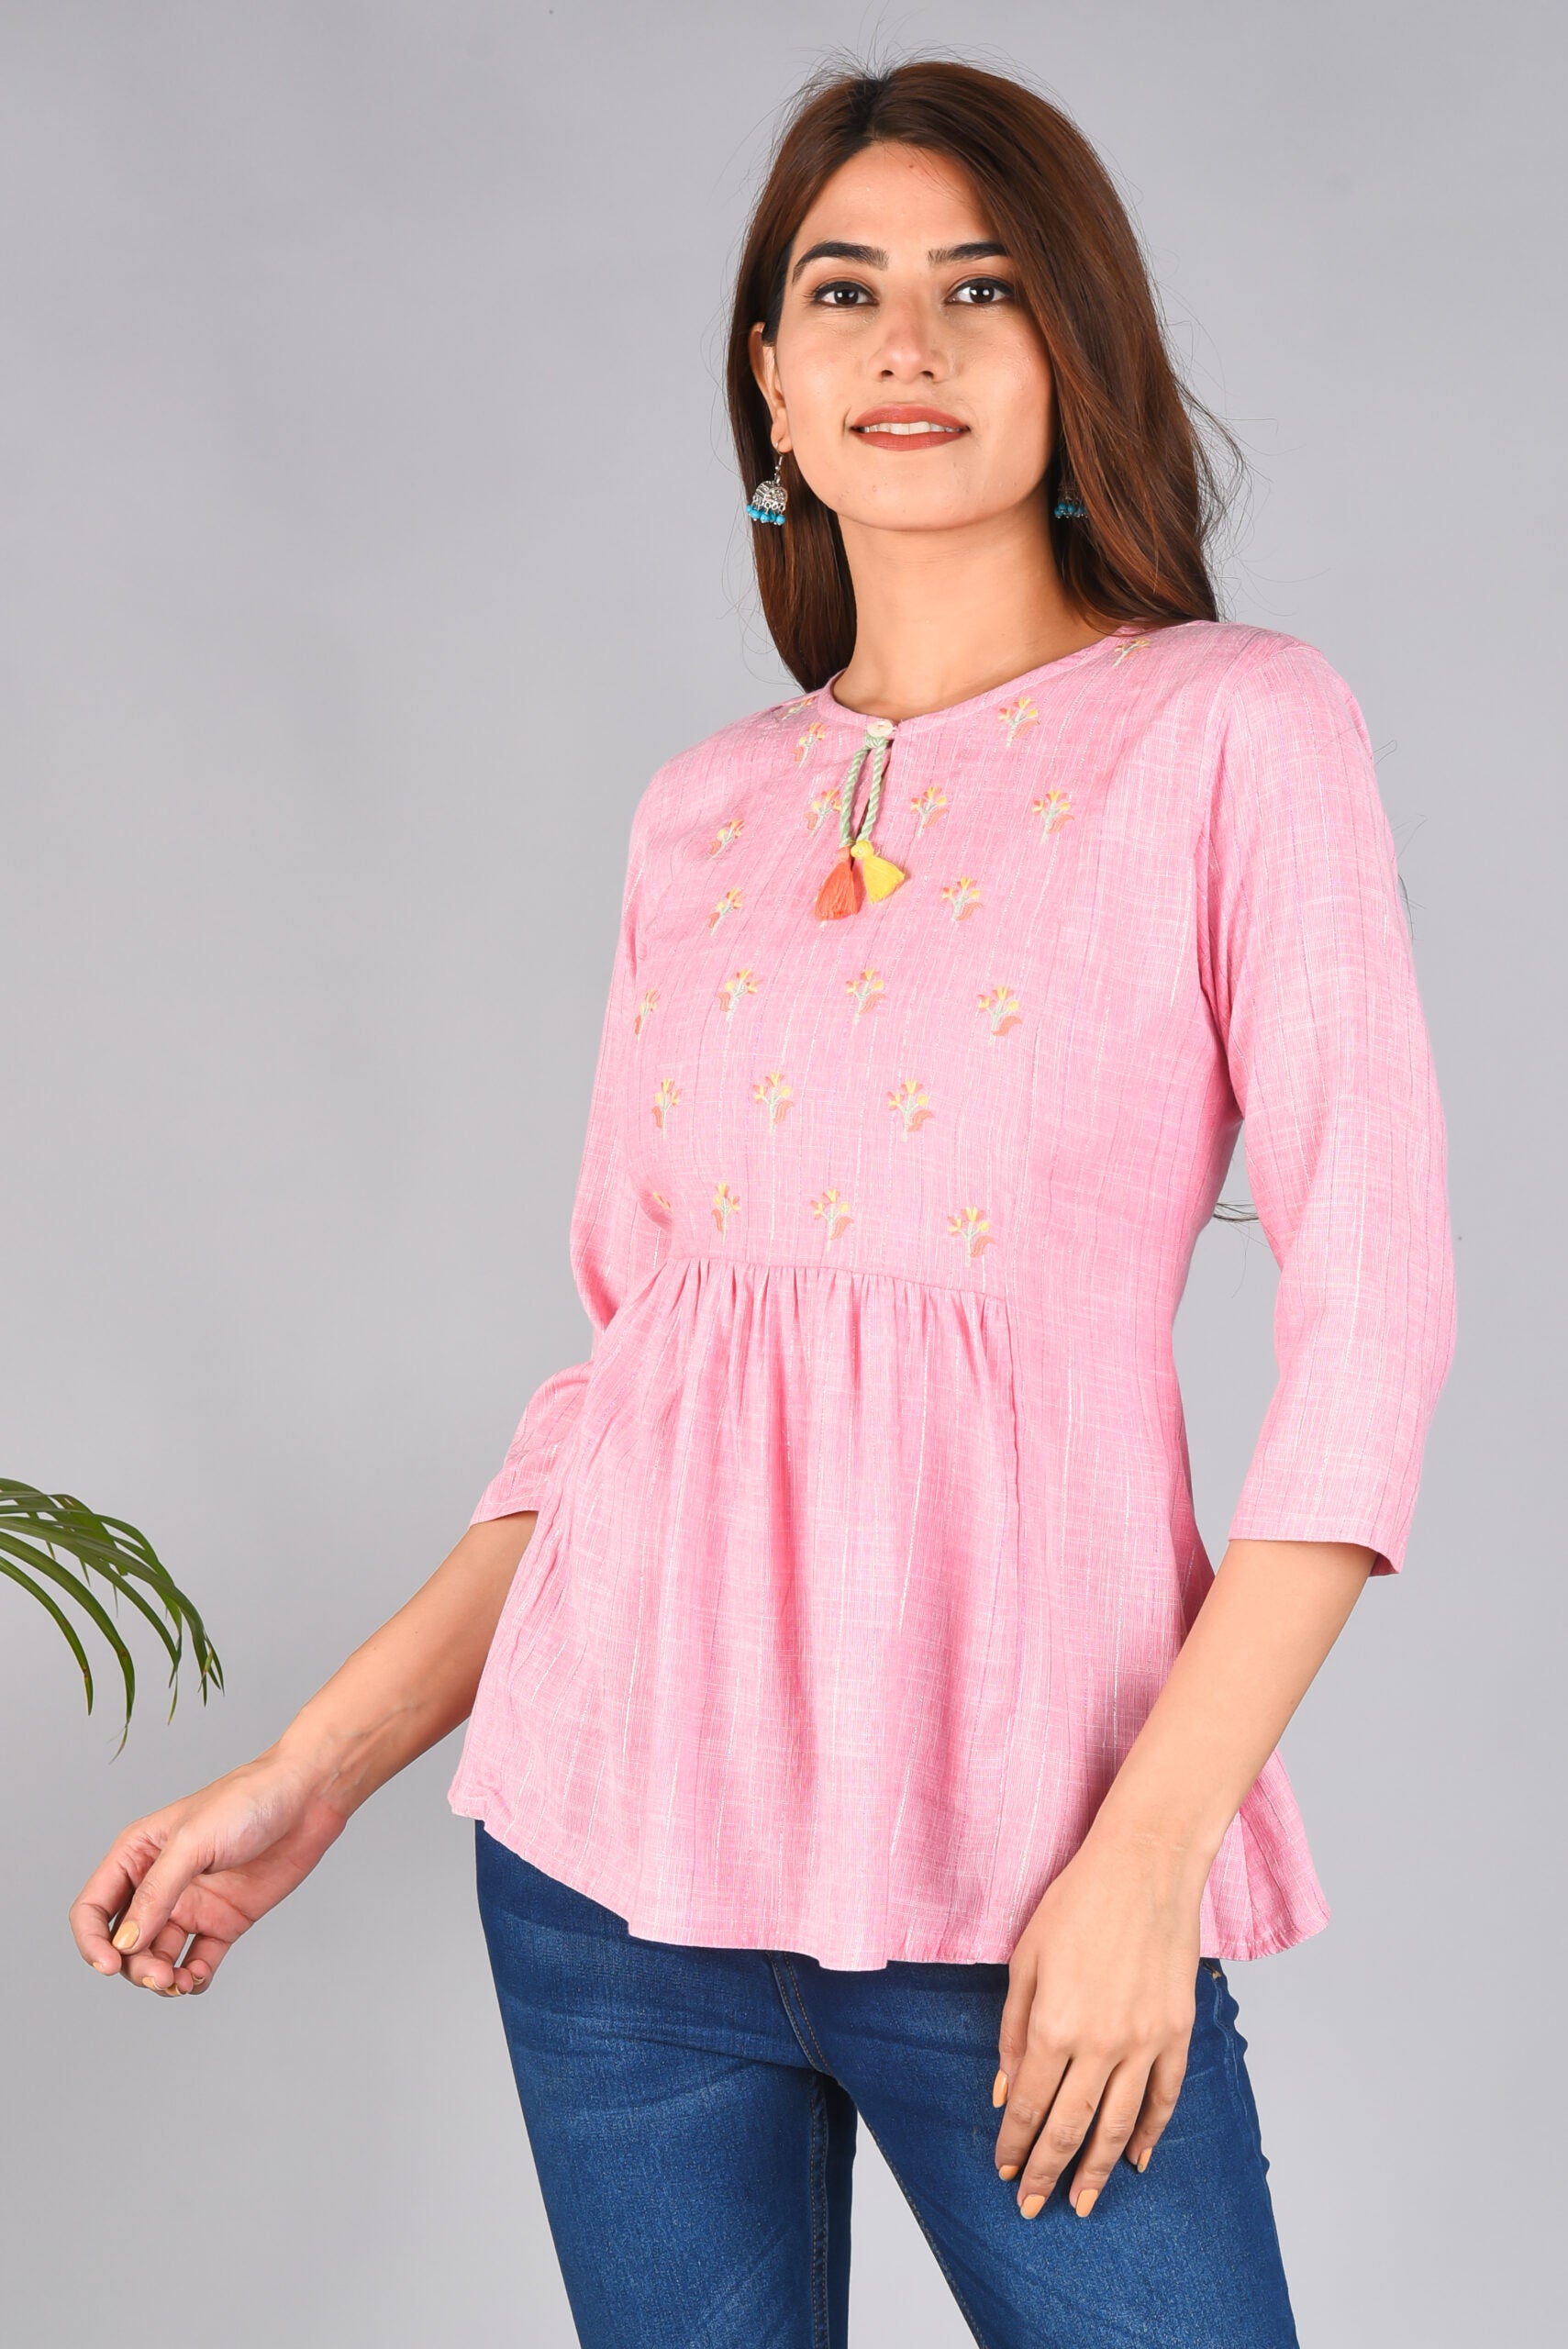 Keyhole Neck Embroidered Top